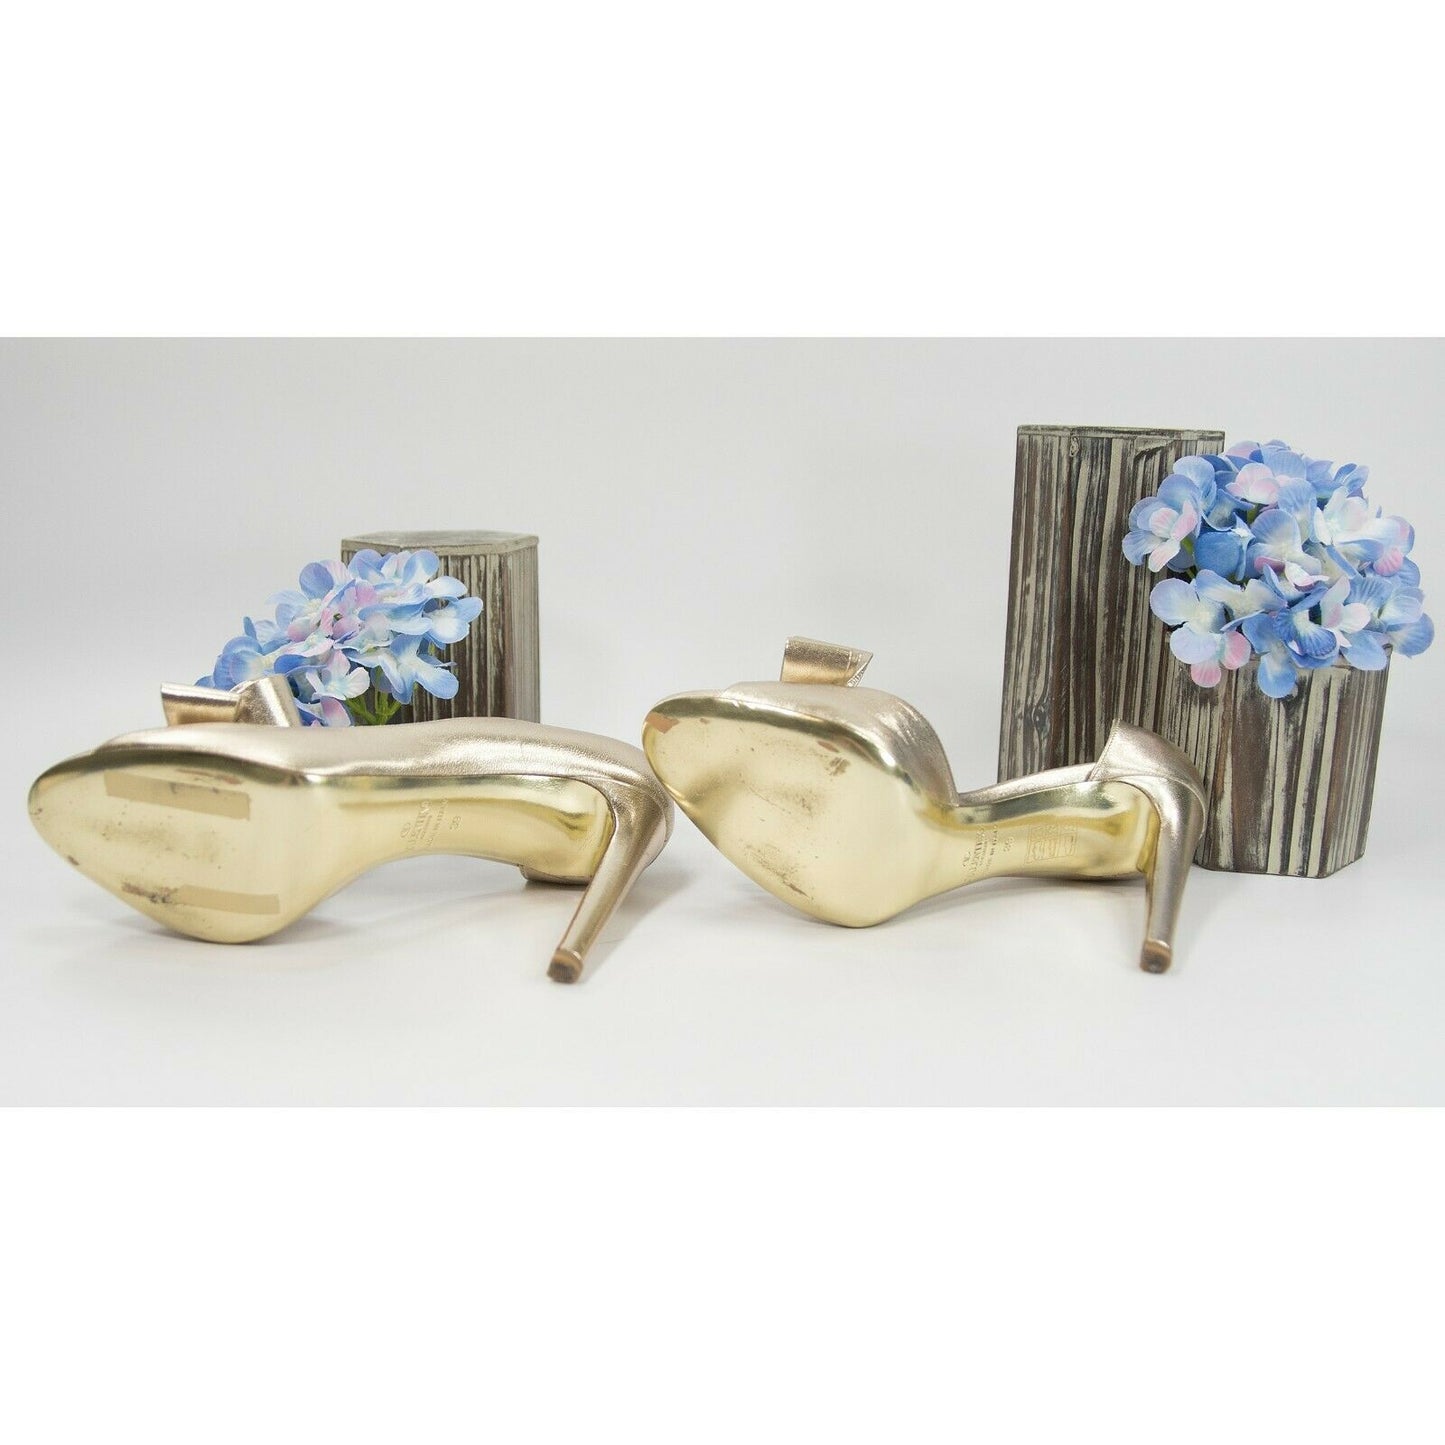 Valentino Gold Metallic Leather D'Orsay Bow Stilletto Heels Shoes Sz 39 9